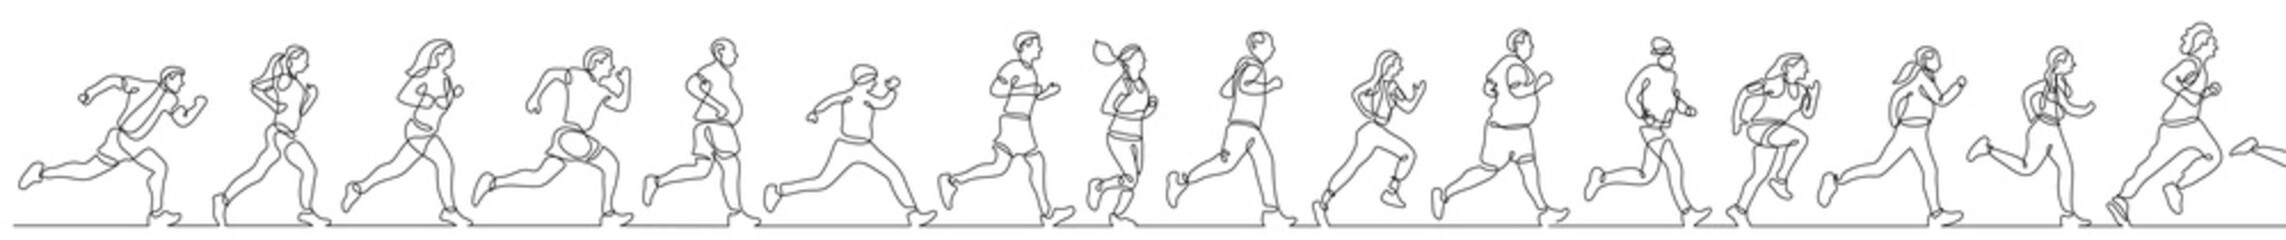 continuous line drawing vector illustration with FULLY EDITABLE STROKE of group of diverse people exercising jogging